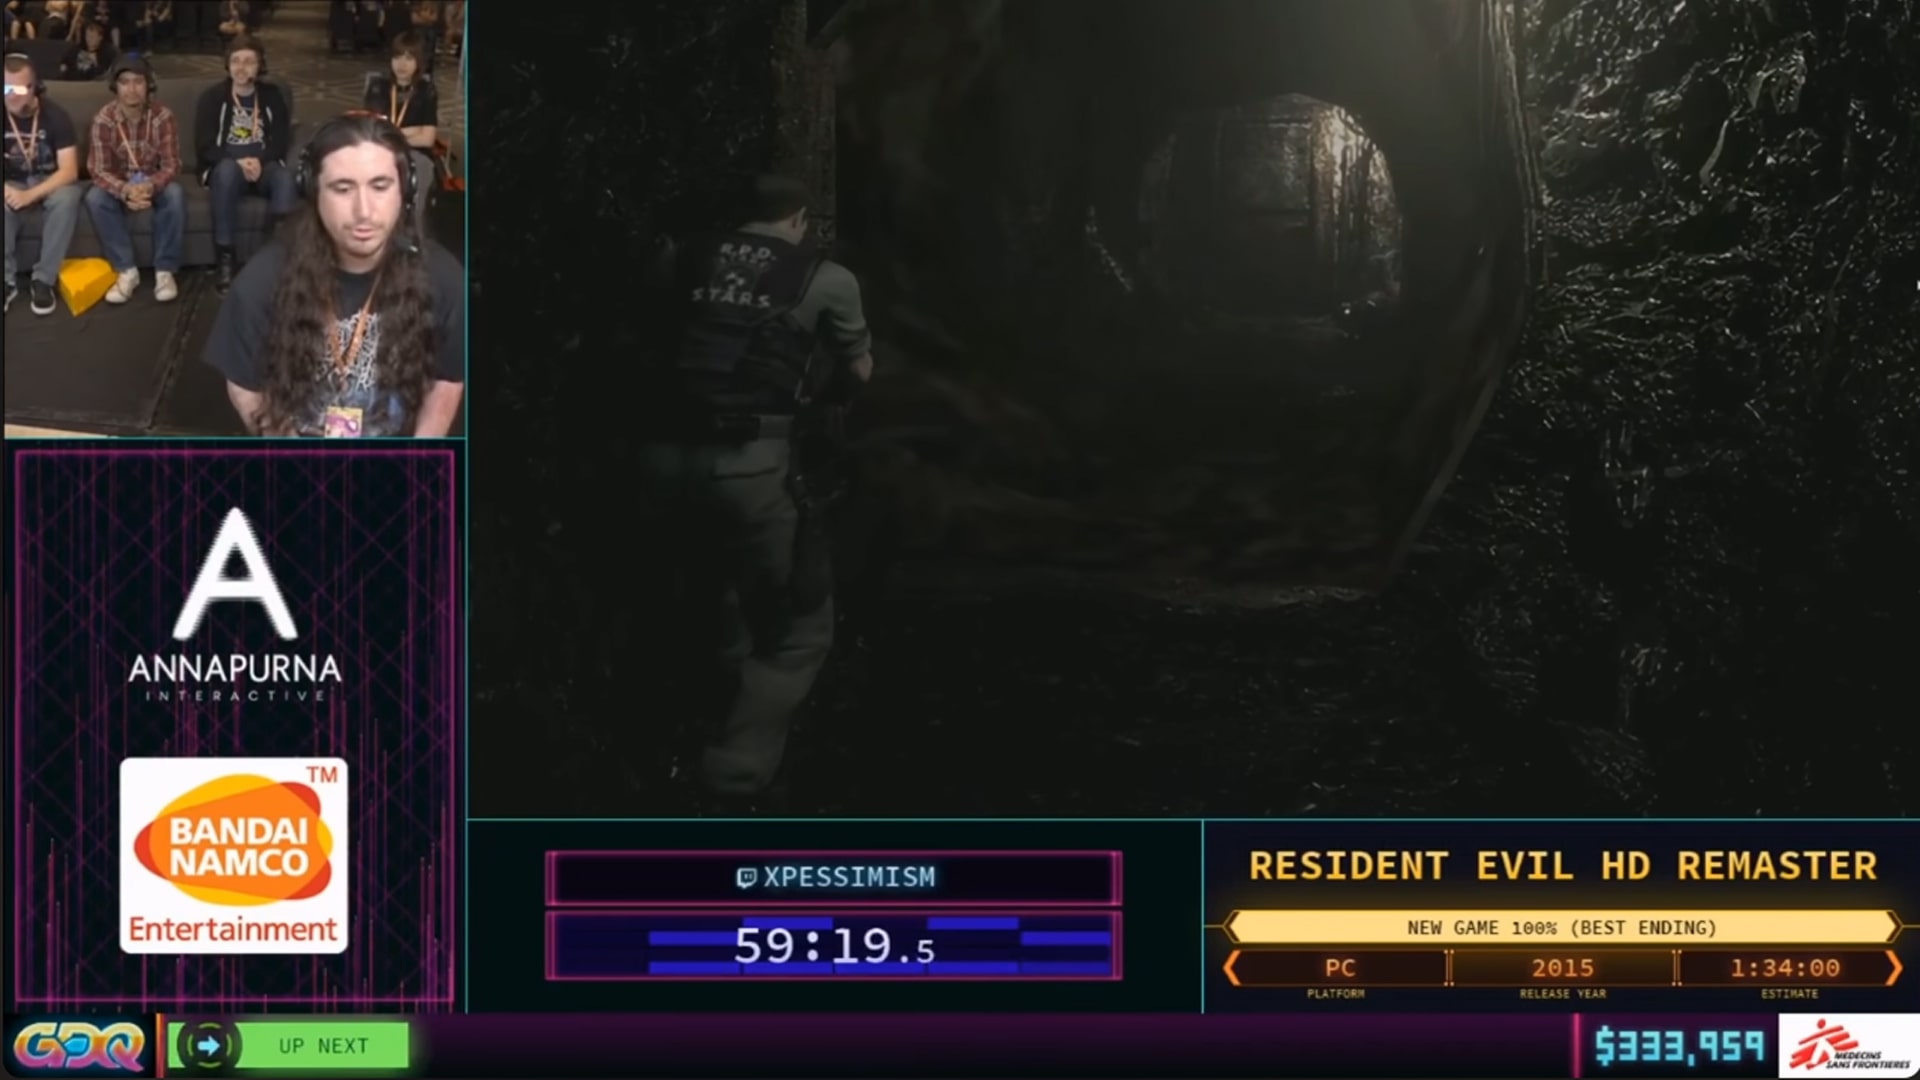 Pessimism, a speedrunner, showcasing a speedrun of Resident Evil at the Games Done Quick 2018 event.